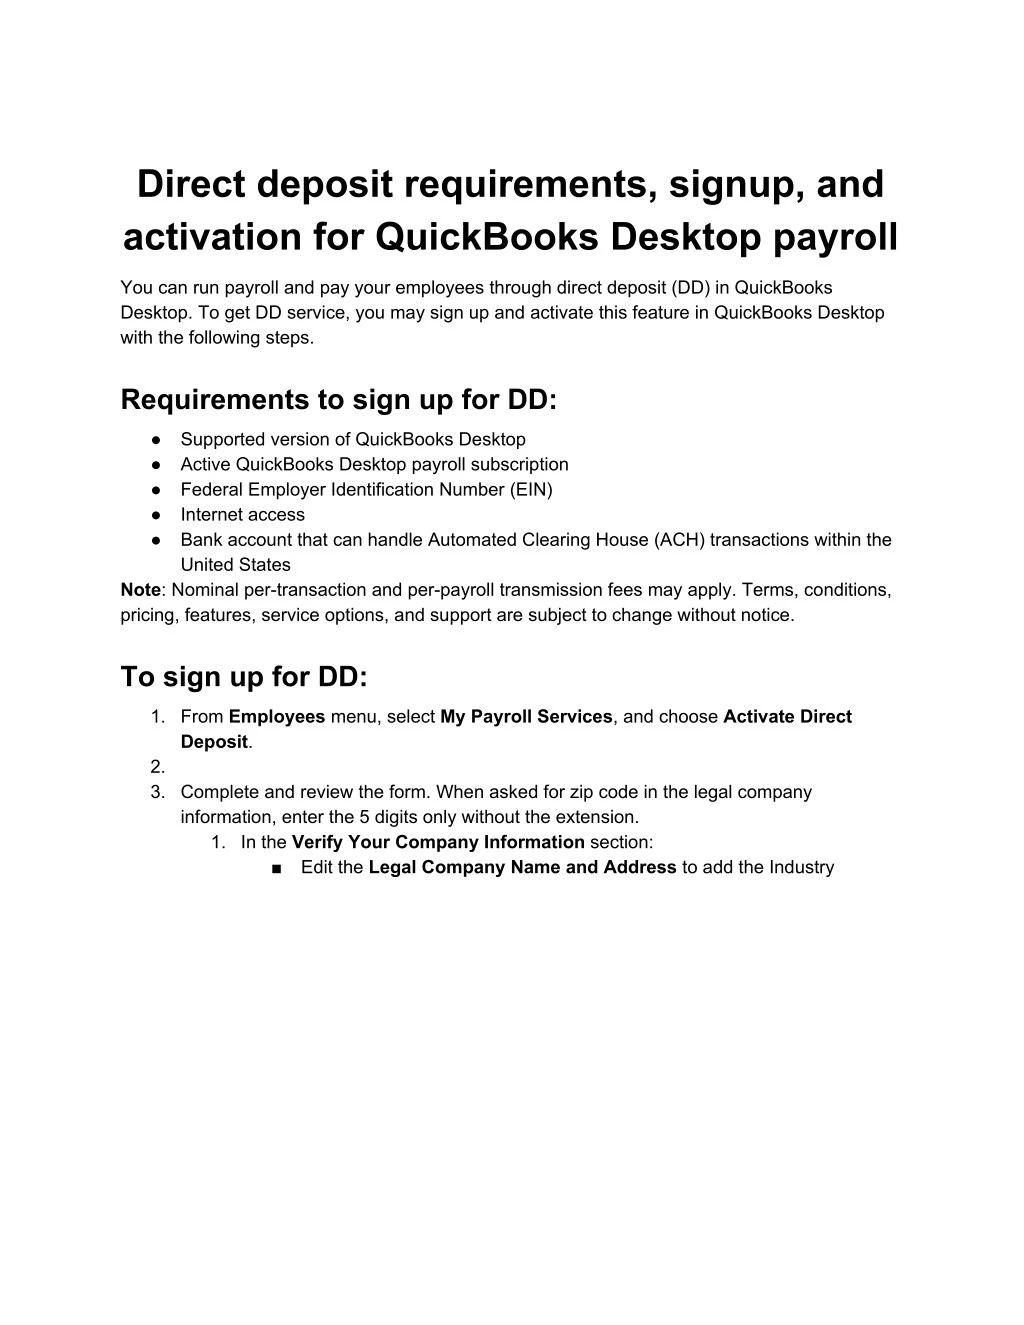 direct deposit requirements signup and activation